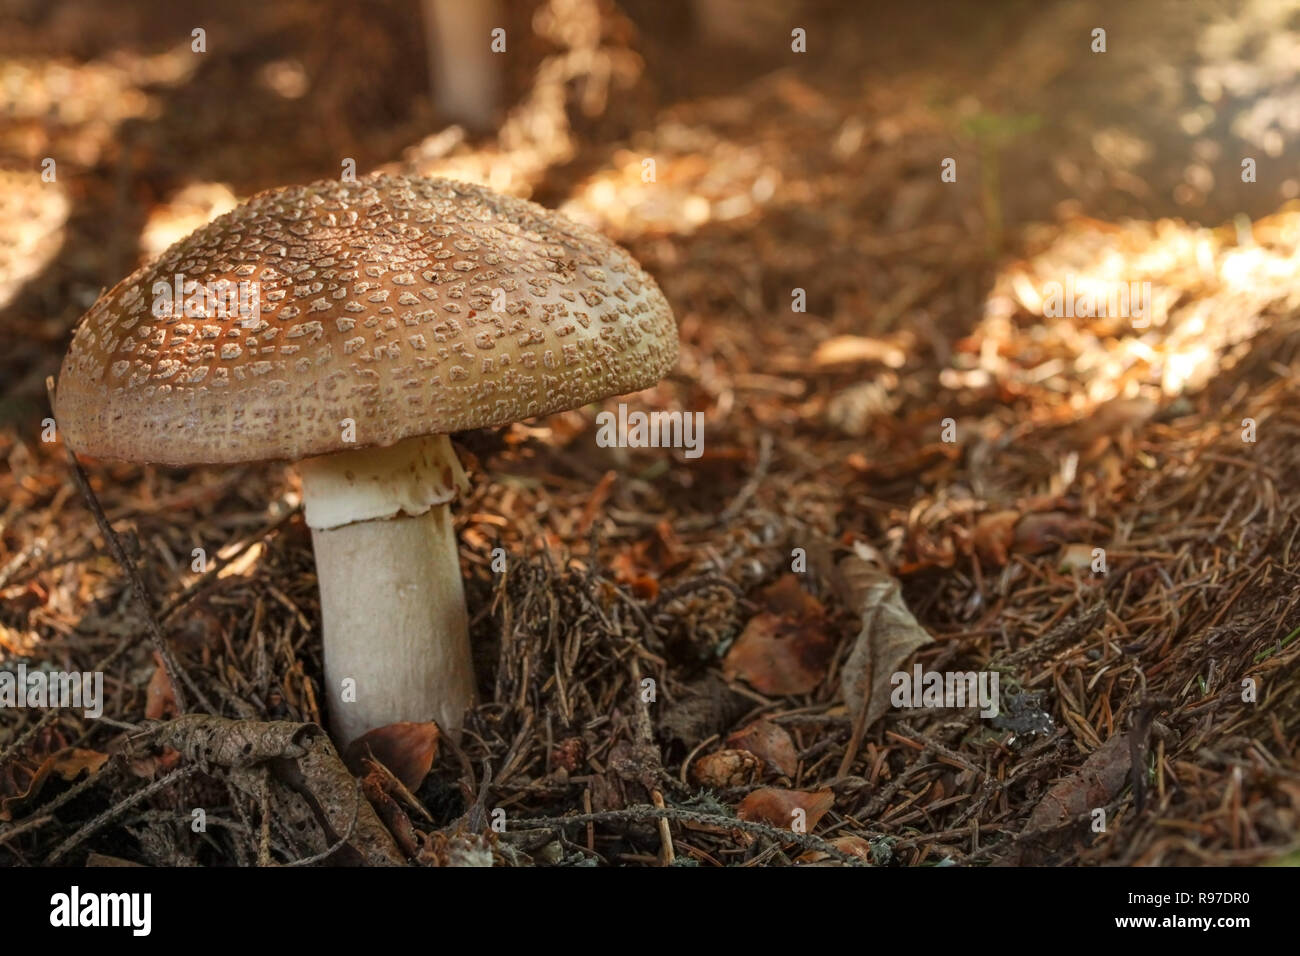 Blusher (Amanita rubescens) in dry moss, sun shining a little, in forest shade. Stock Photo